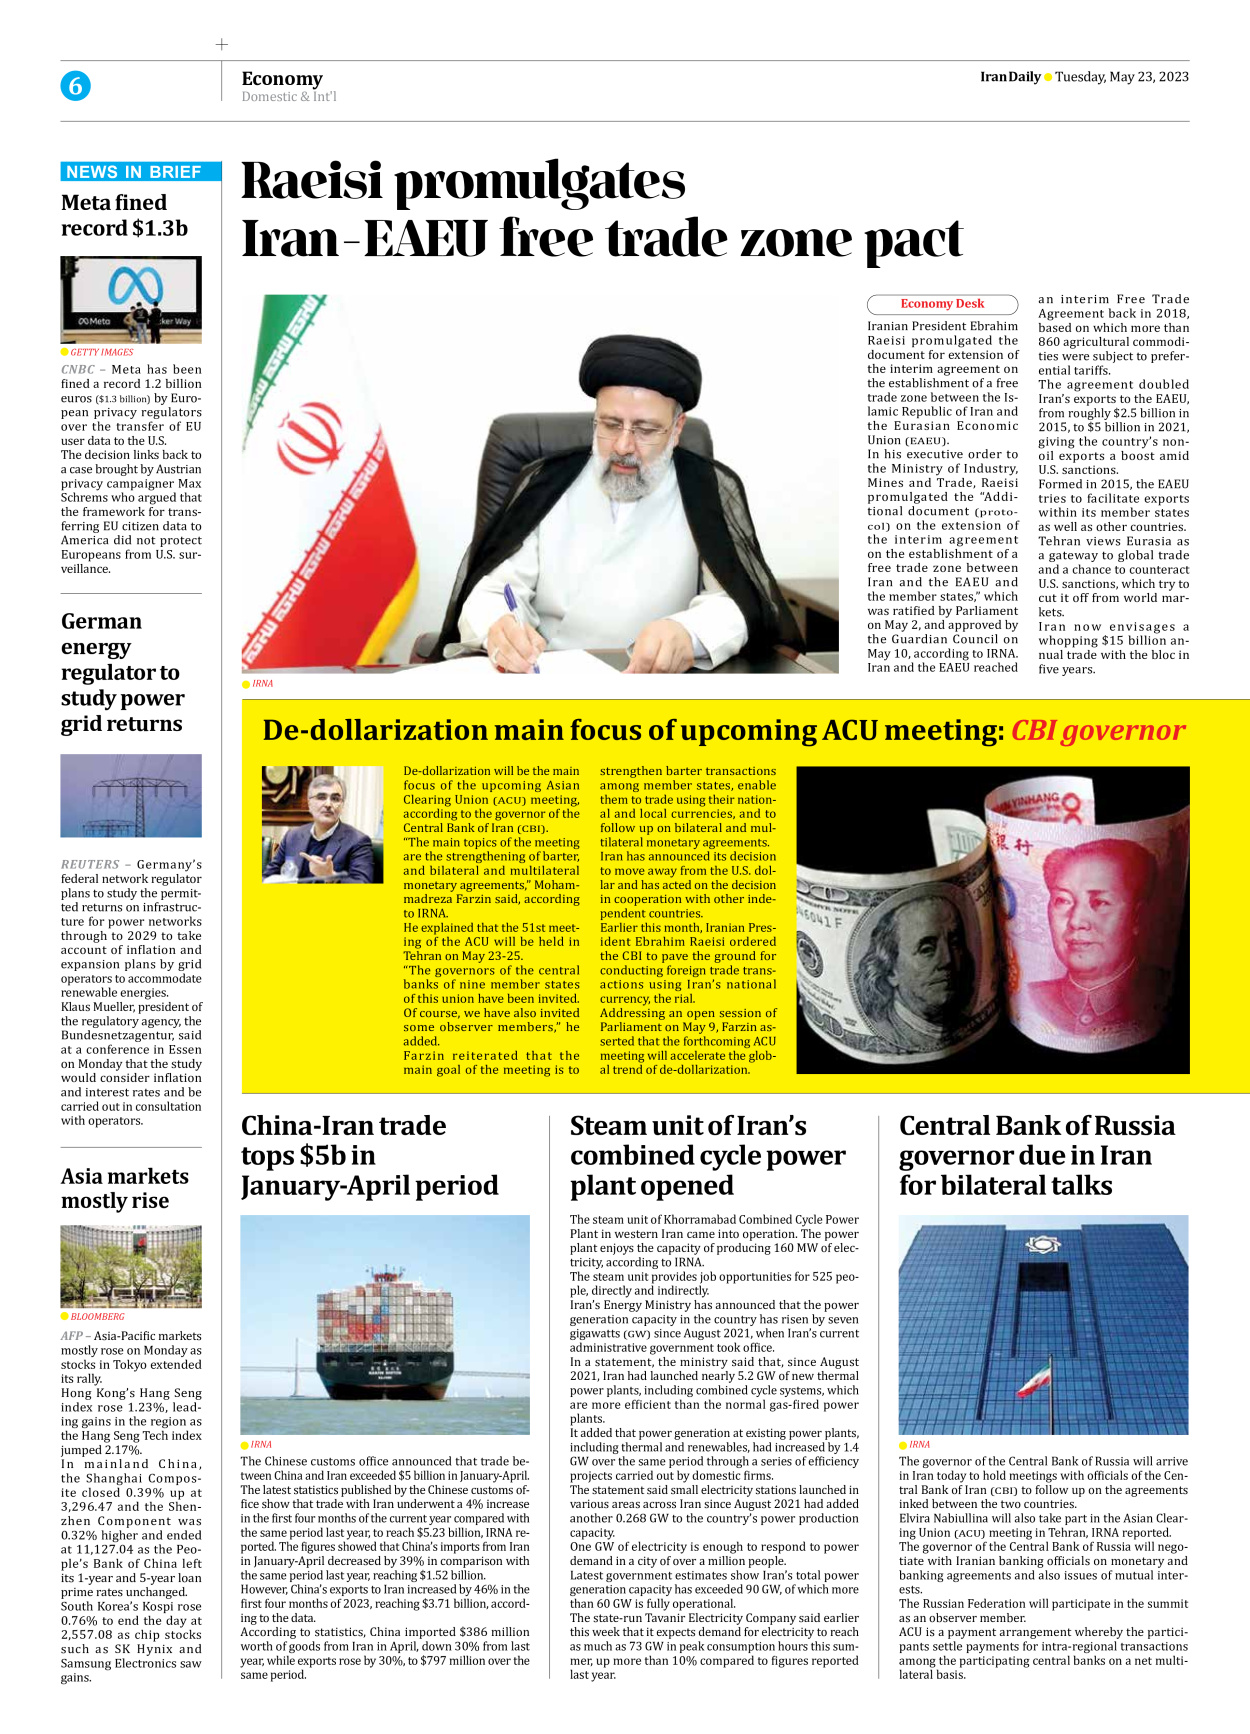 Iran Daily - Number Seven Thousand Two Hundred and Ninety Eight - 23 May 2023 - Page 6